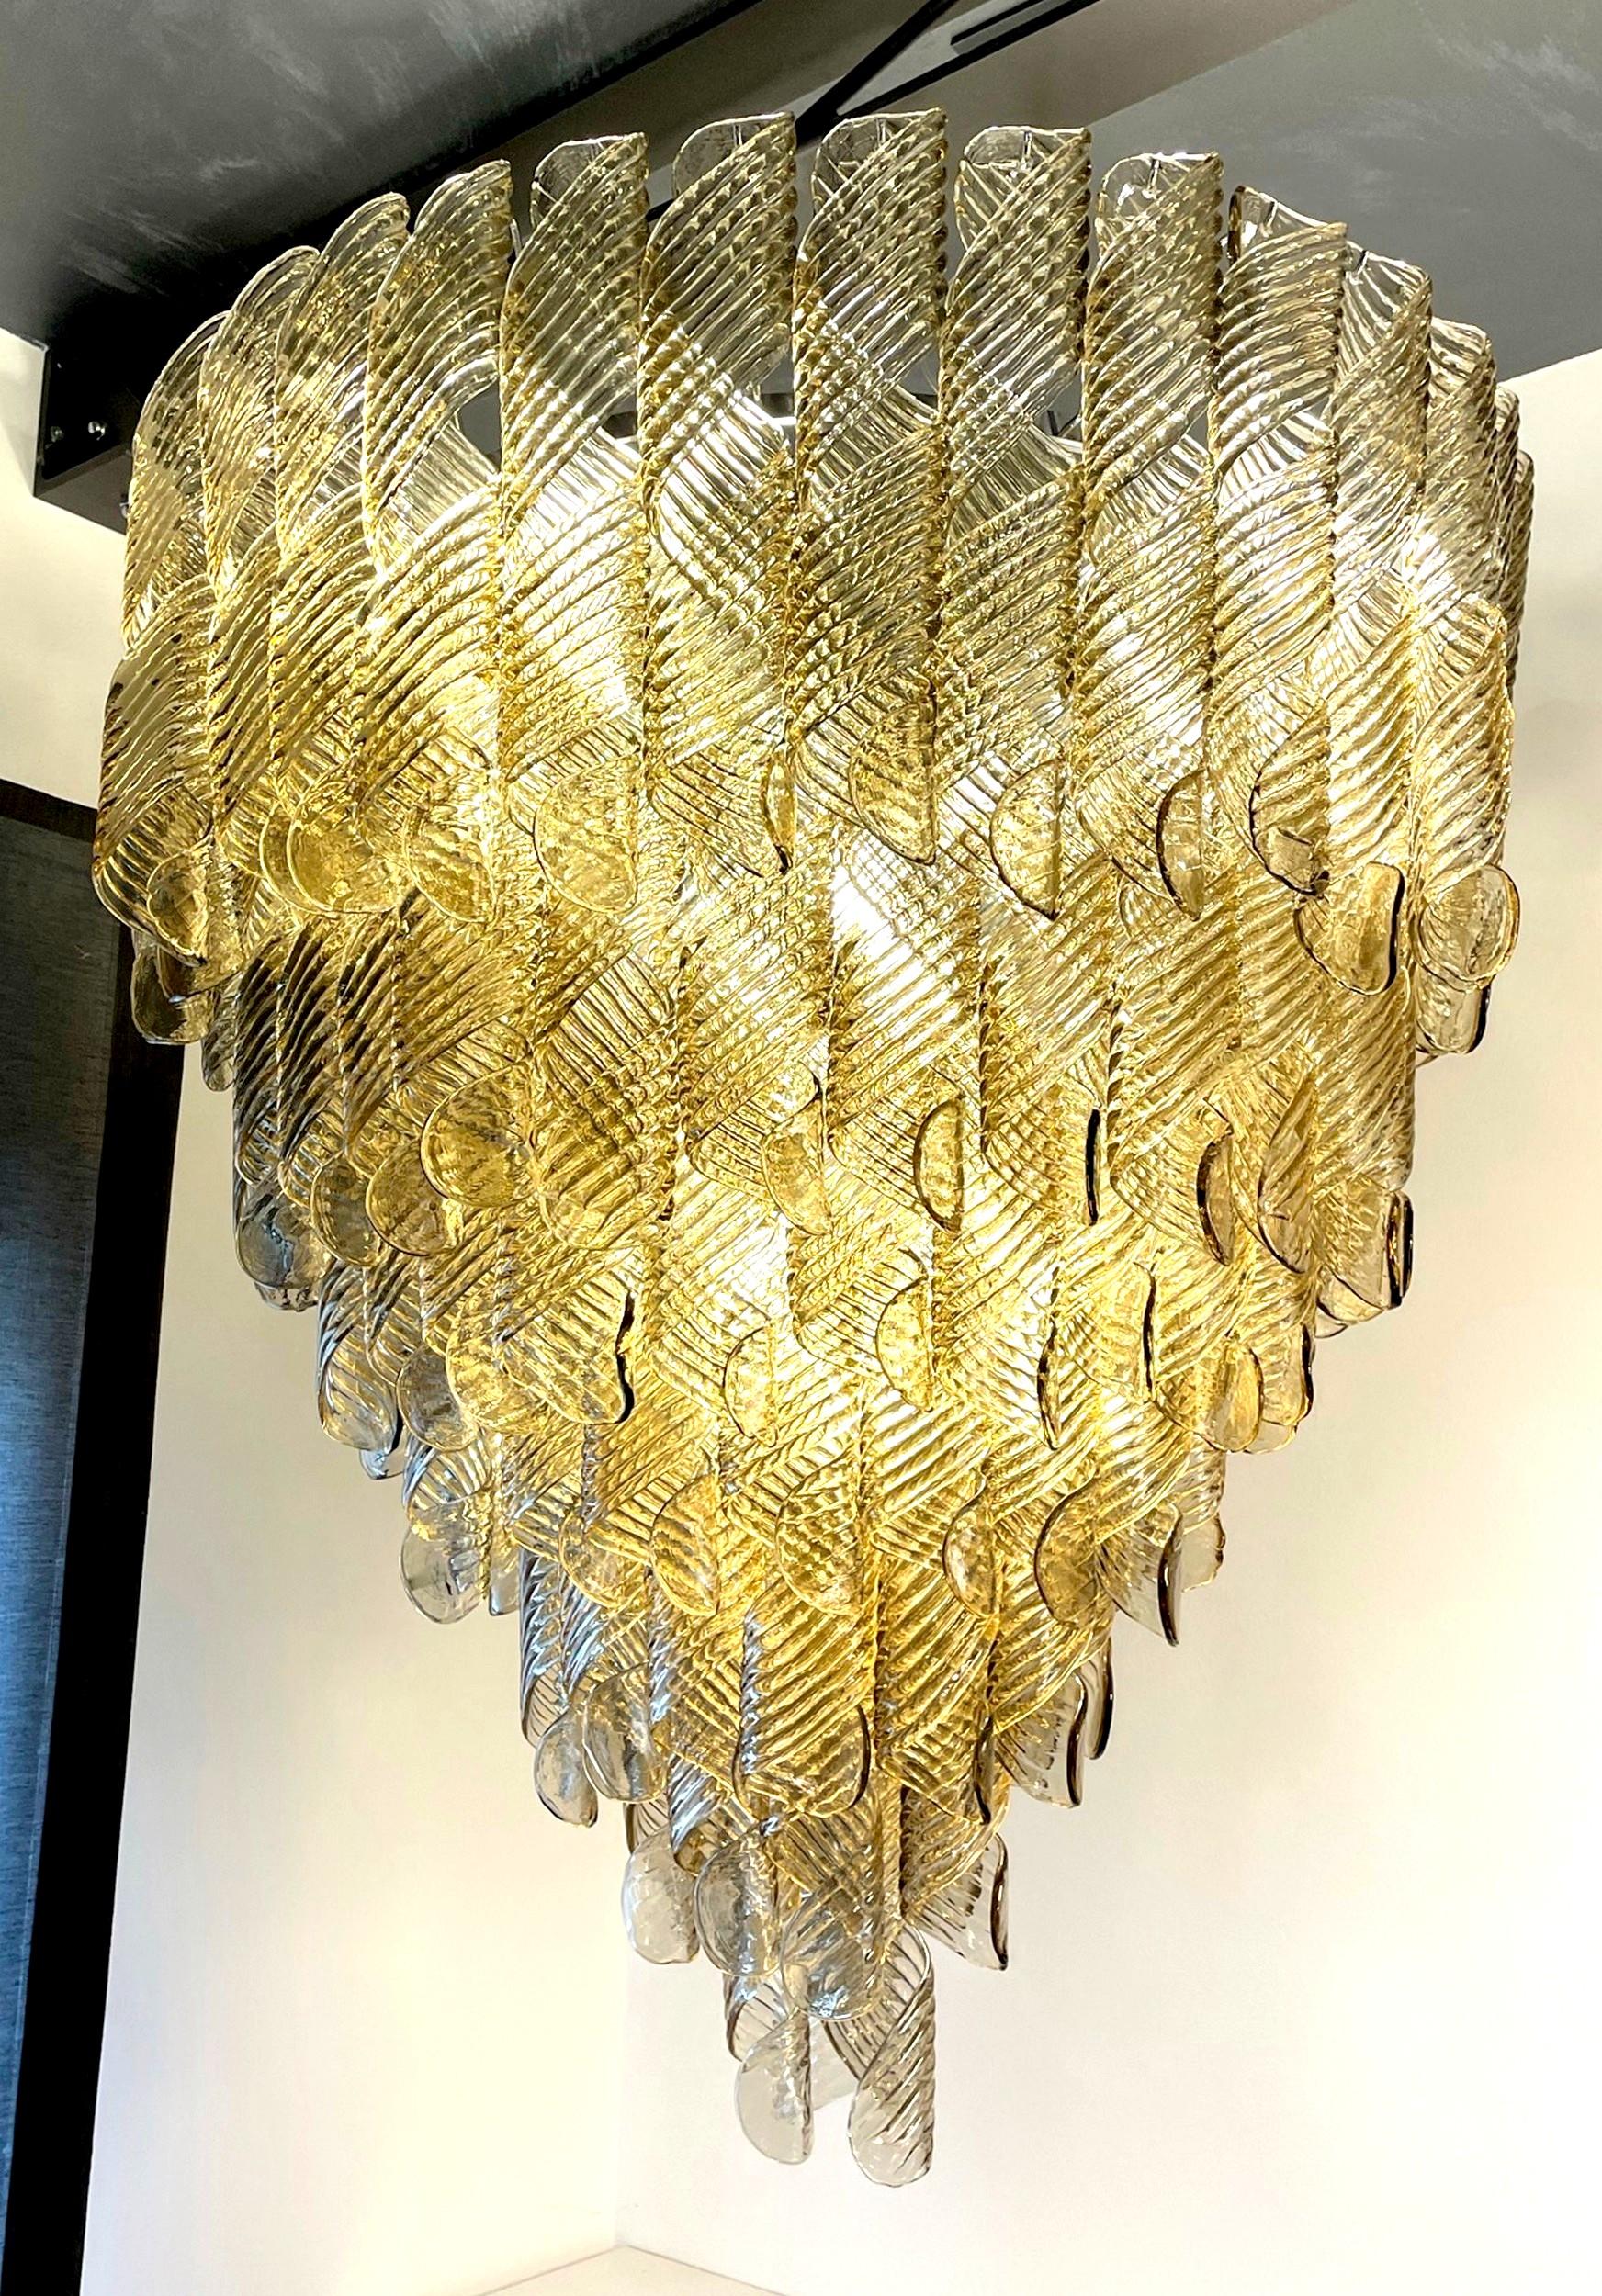 Monumental Chandelier, Murano Fume Glass in Spiral Ribbed Elements, 7 Tiers 9